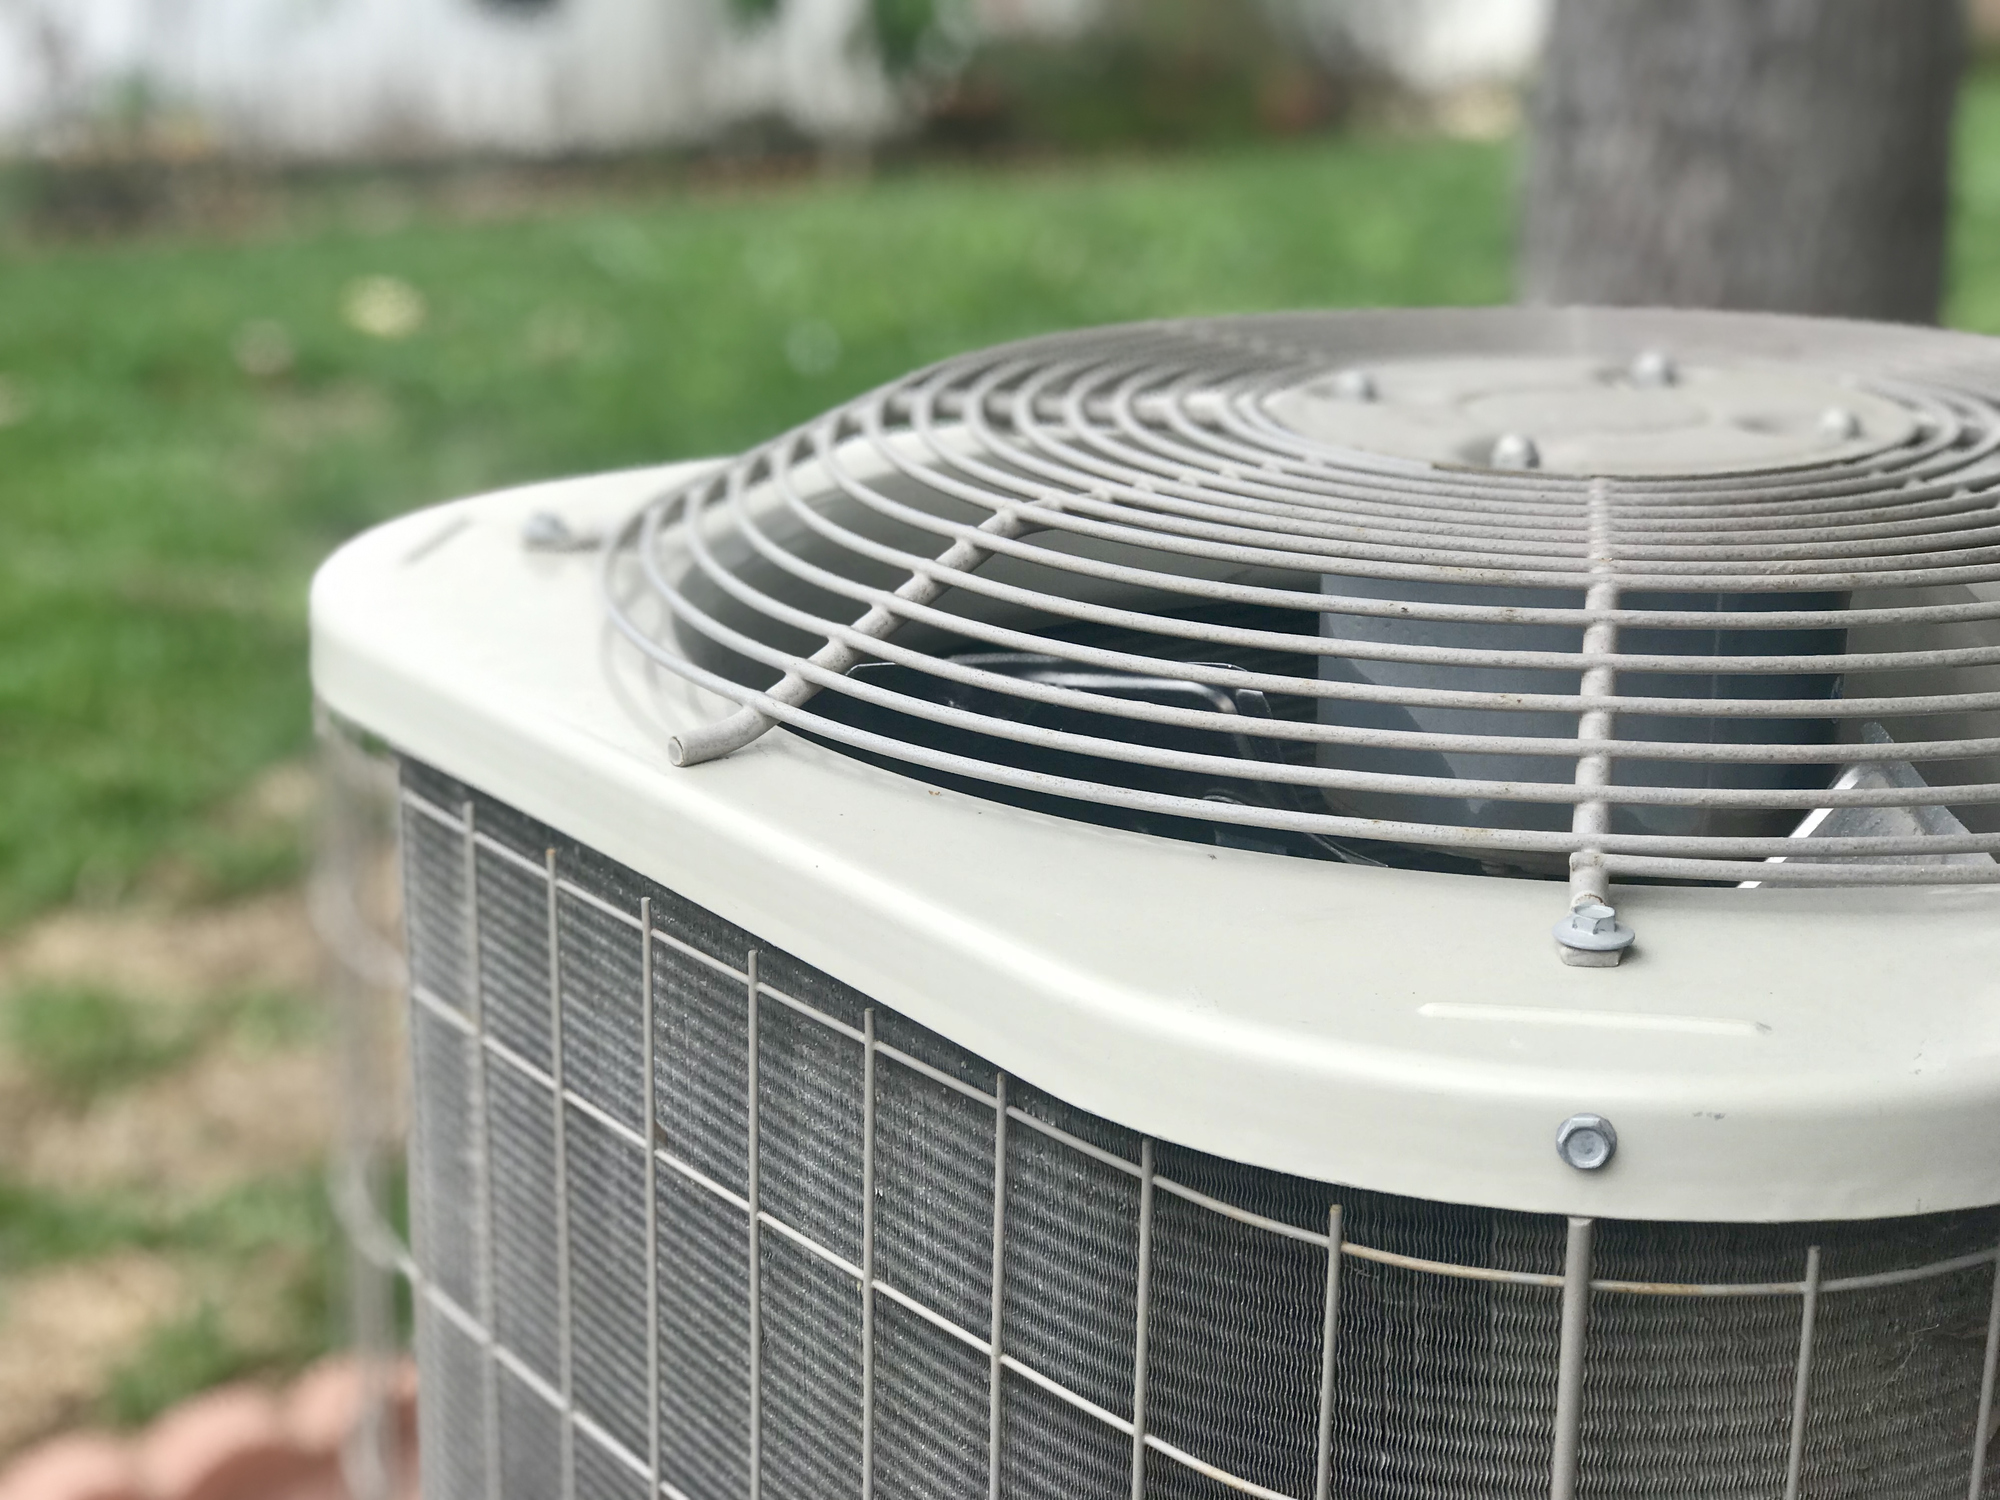 How to Stay Cool with Summer HVAC Hints